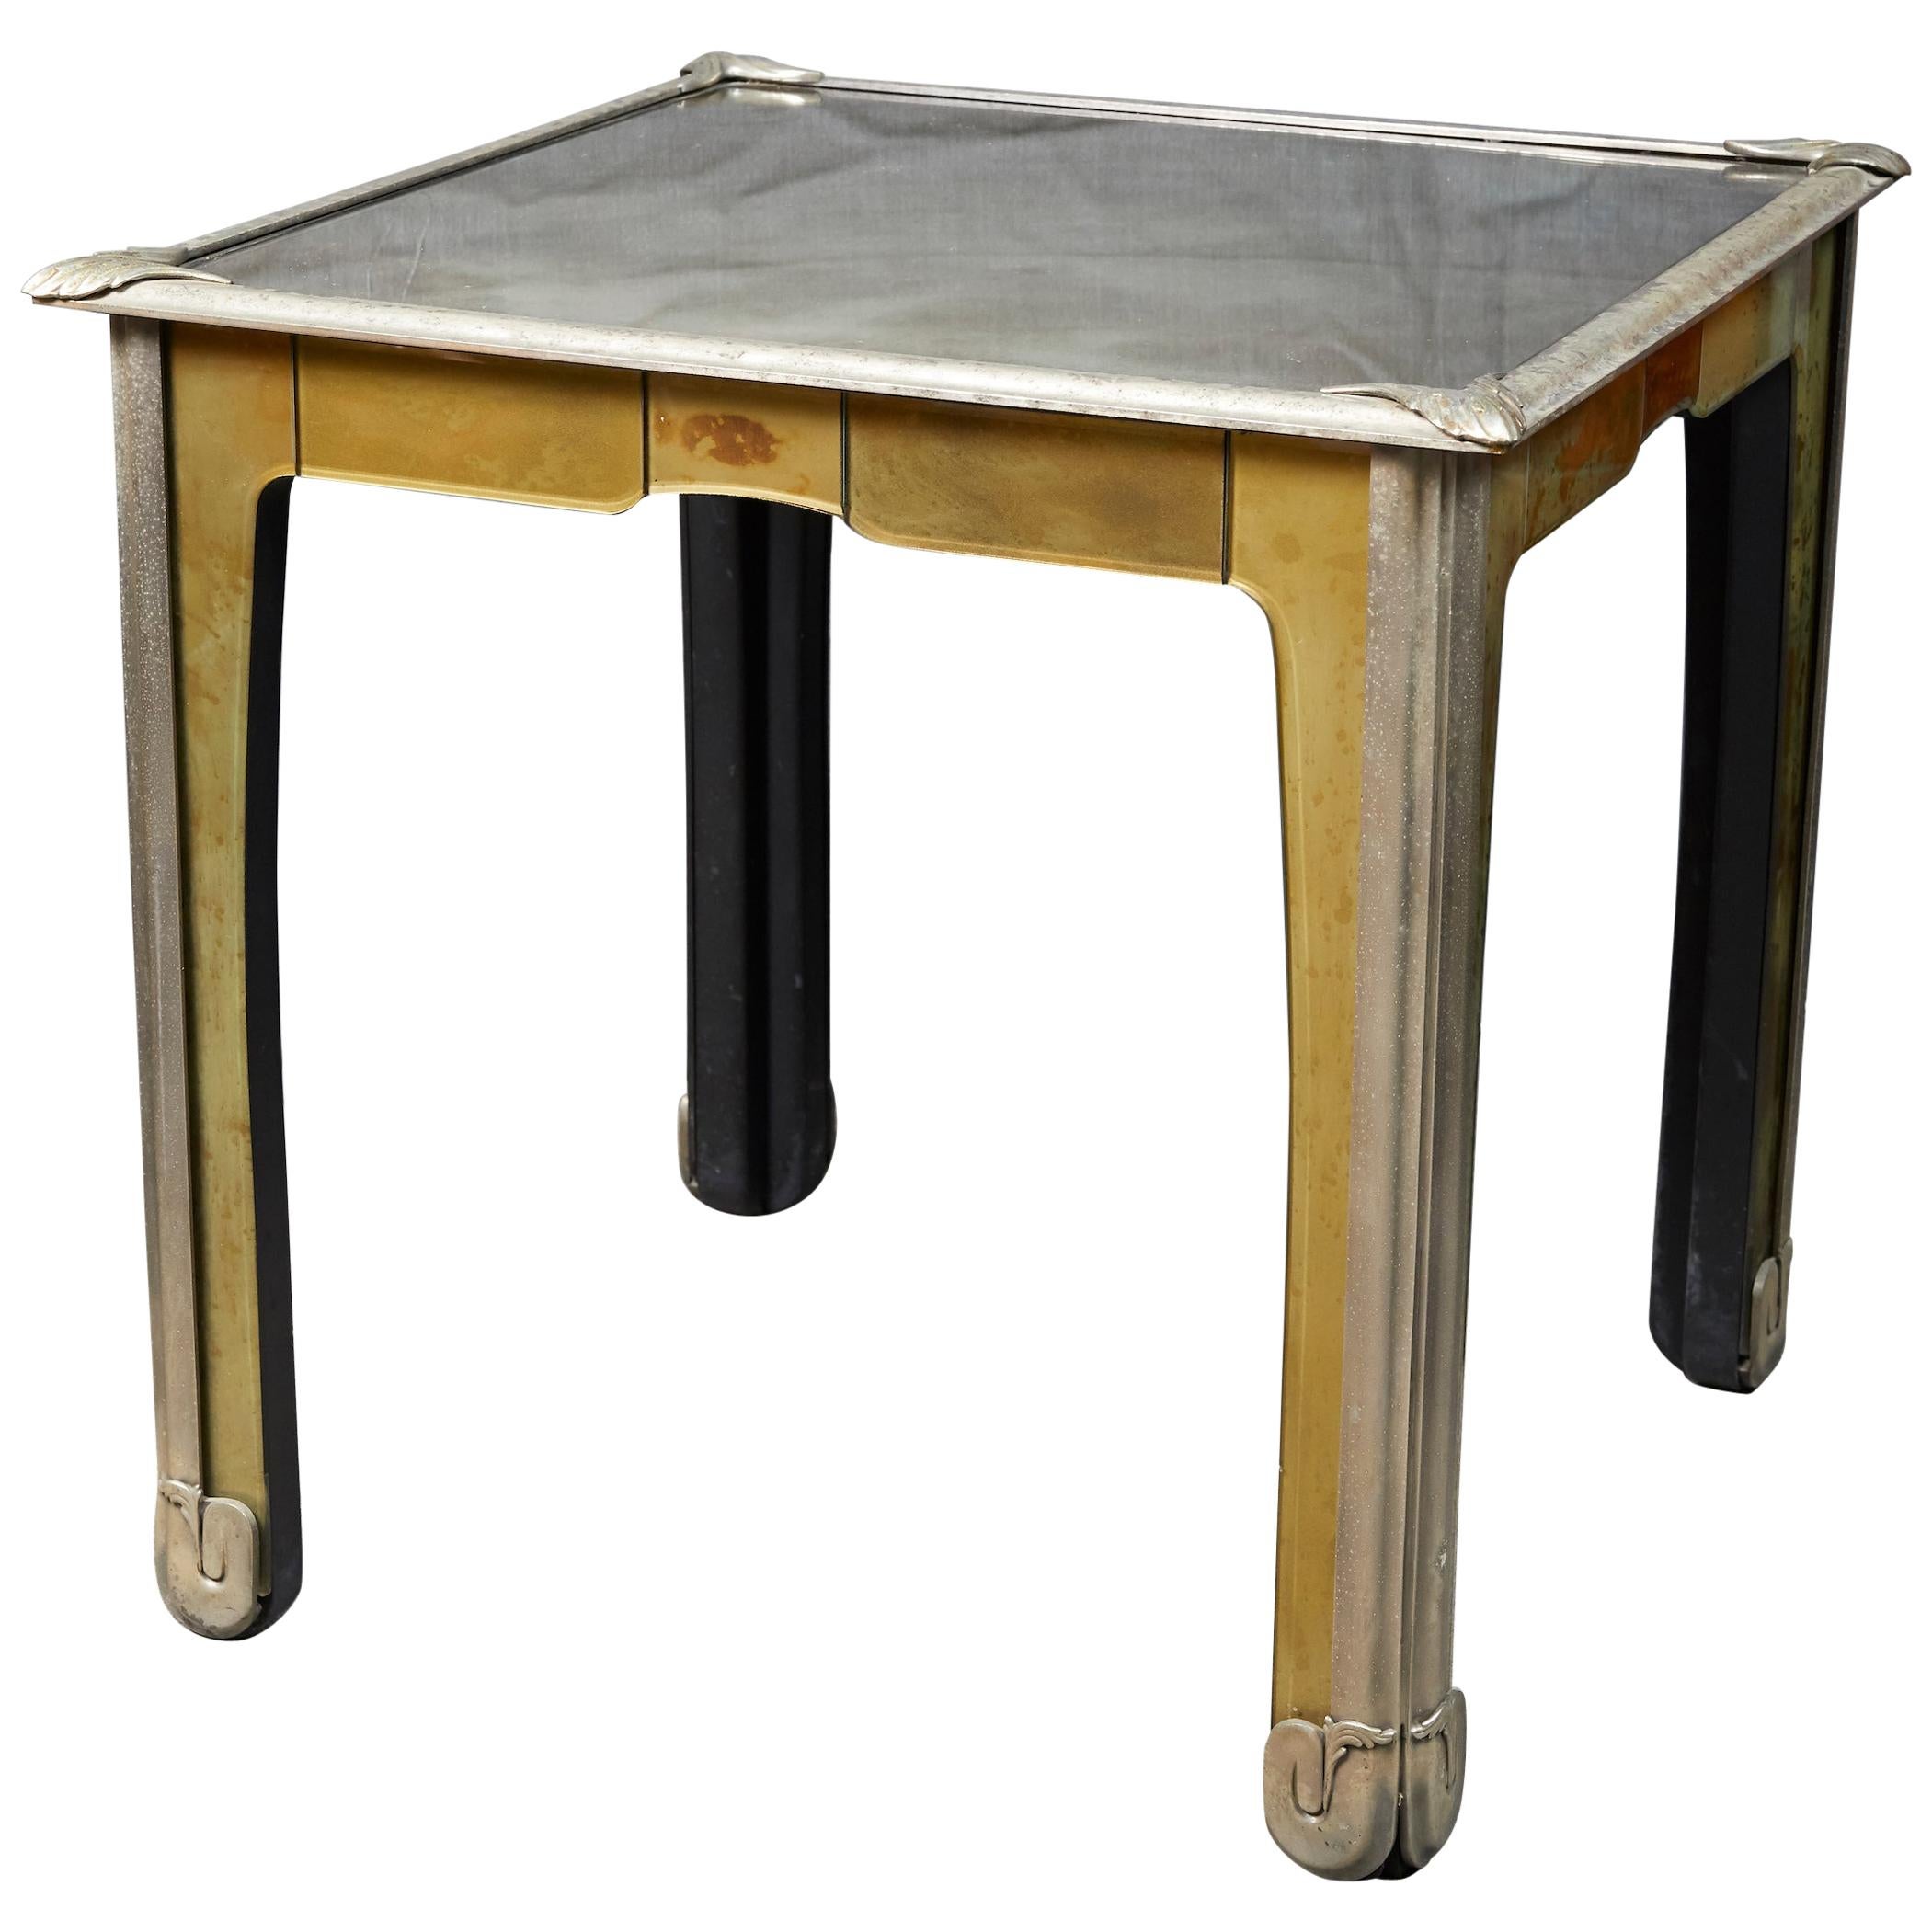 Italian Art Nouveau Style Mirrored Side Table For Sale